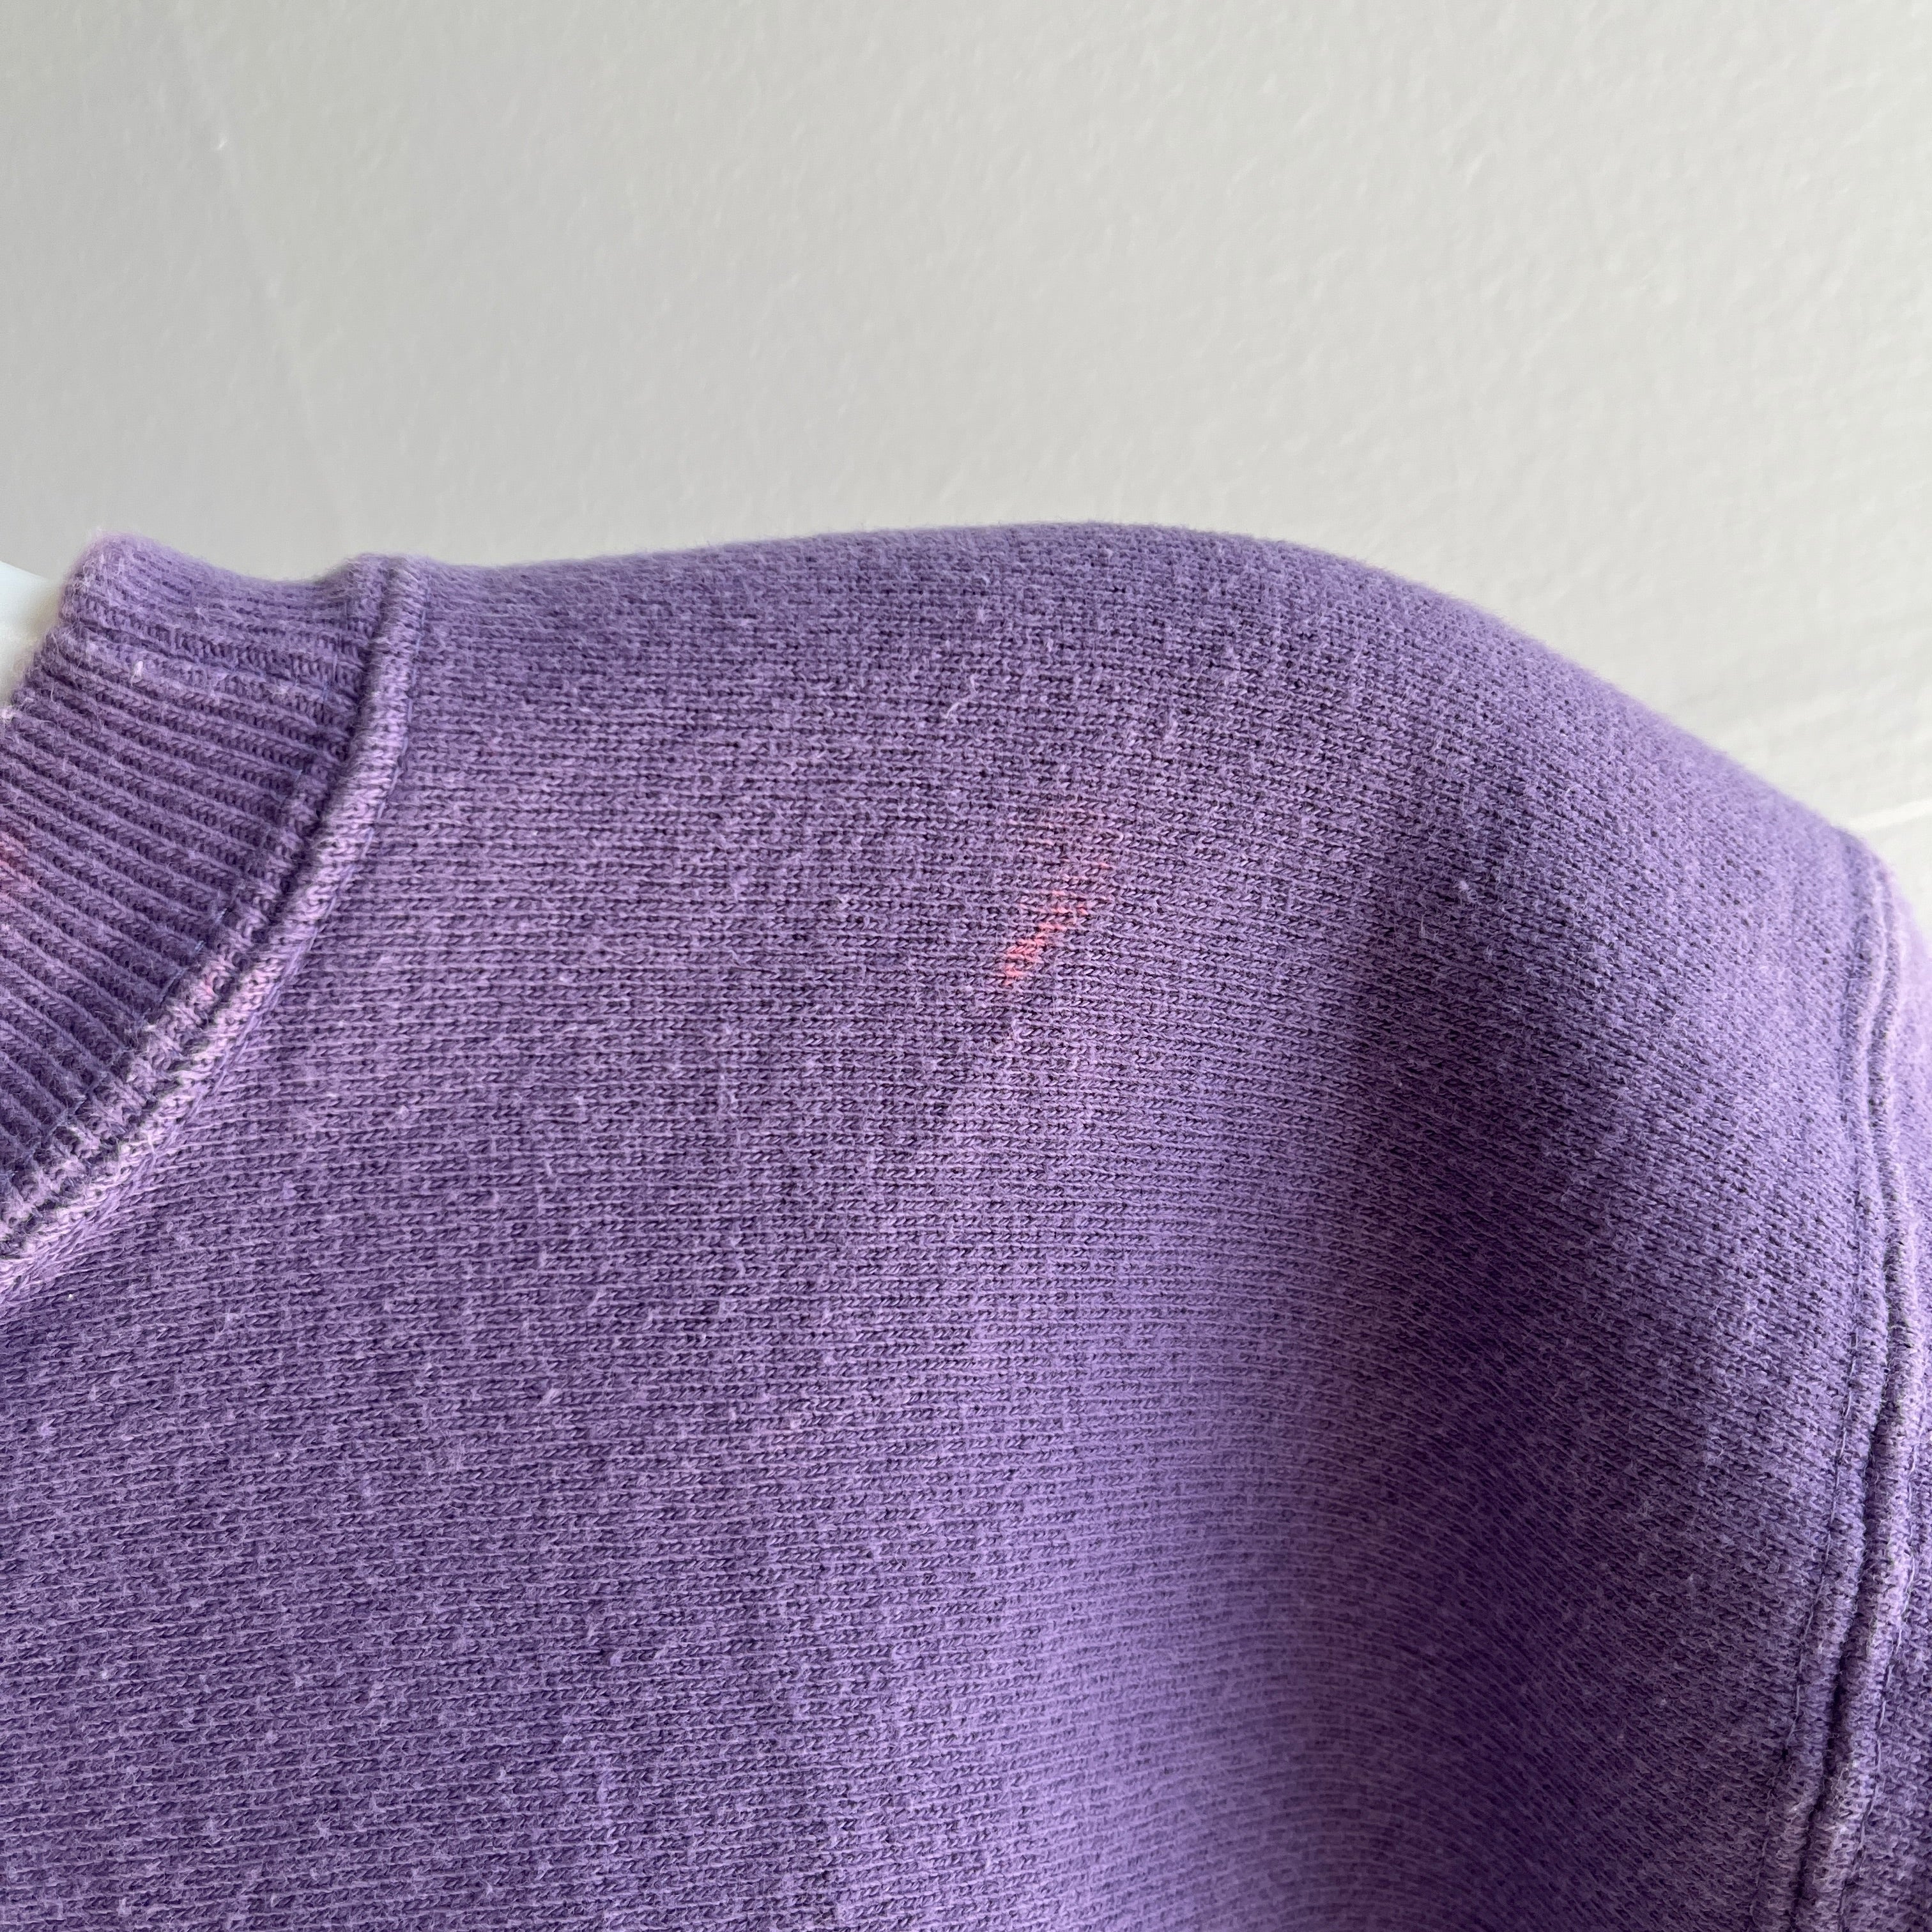 1980/90s Champion Brand Lilac Reverse Weave with some Pink Bleach/Color Bleed